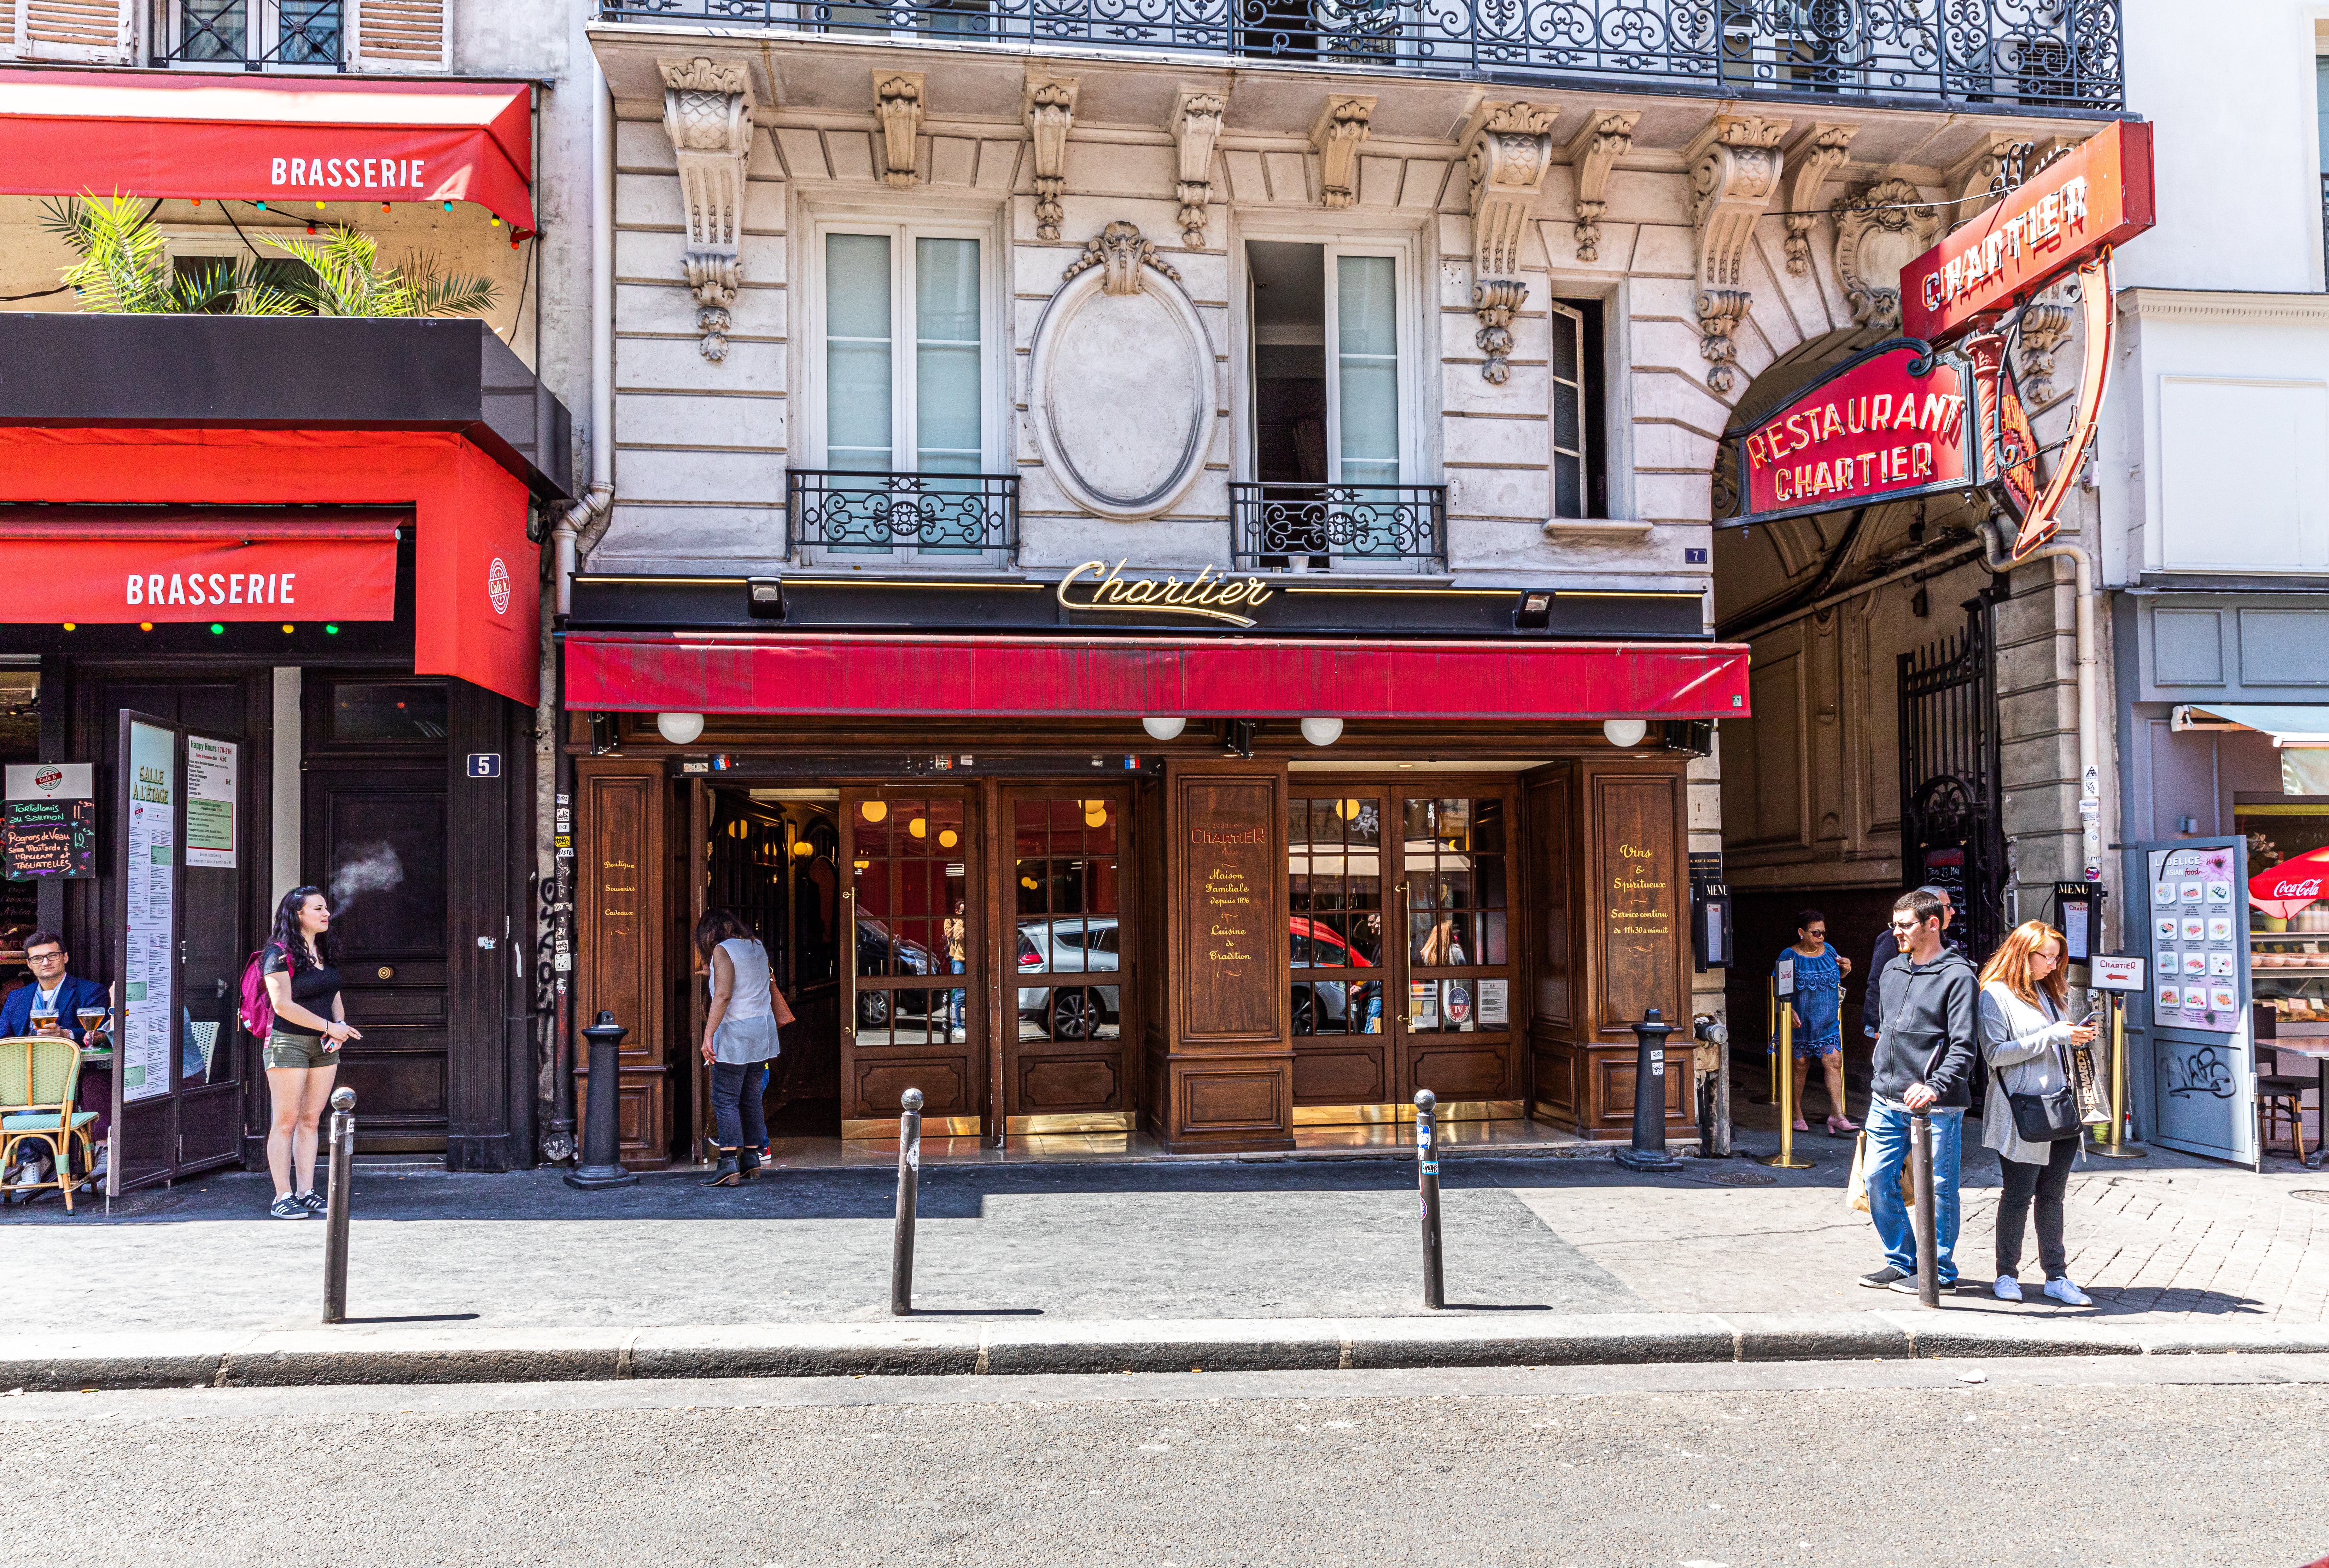 Chartier Bouillon has three locations across Paris, serving hearty, traditional food